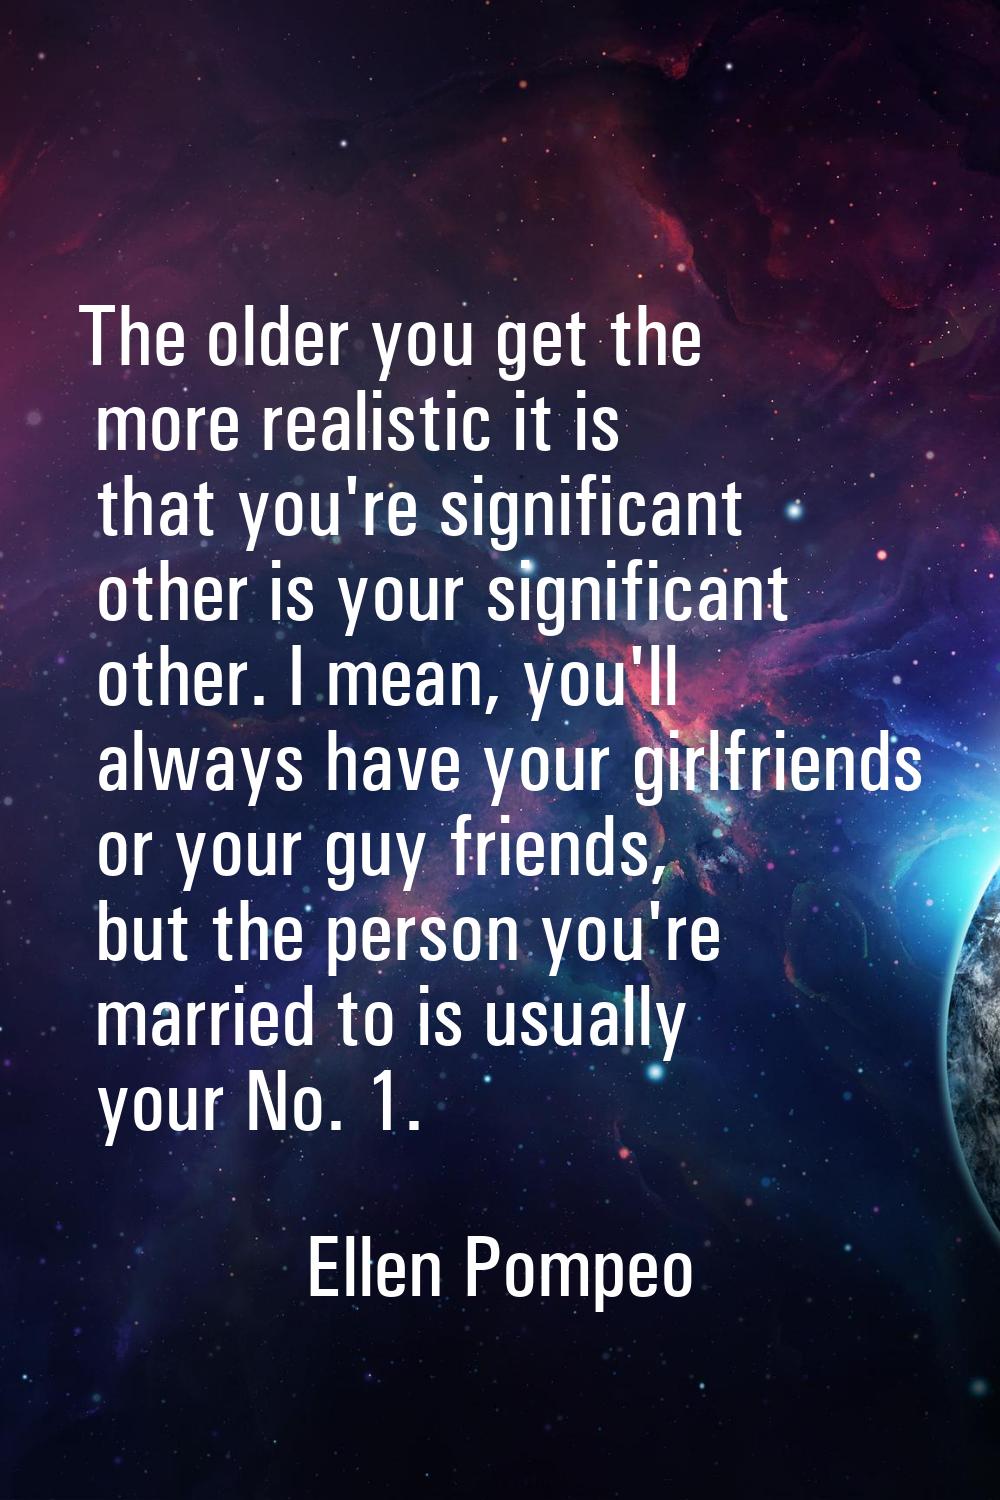 The older you get the more realistic it is that you're significant other is your significant other.